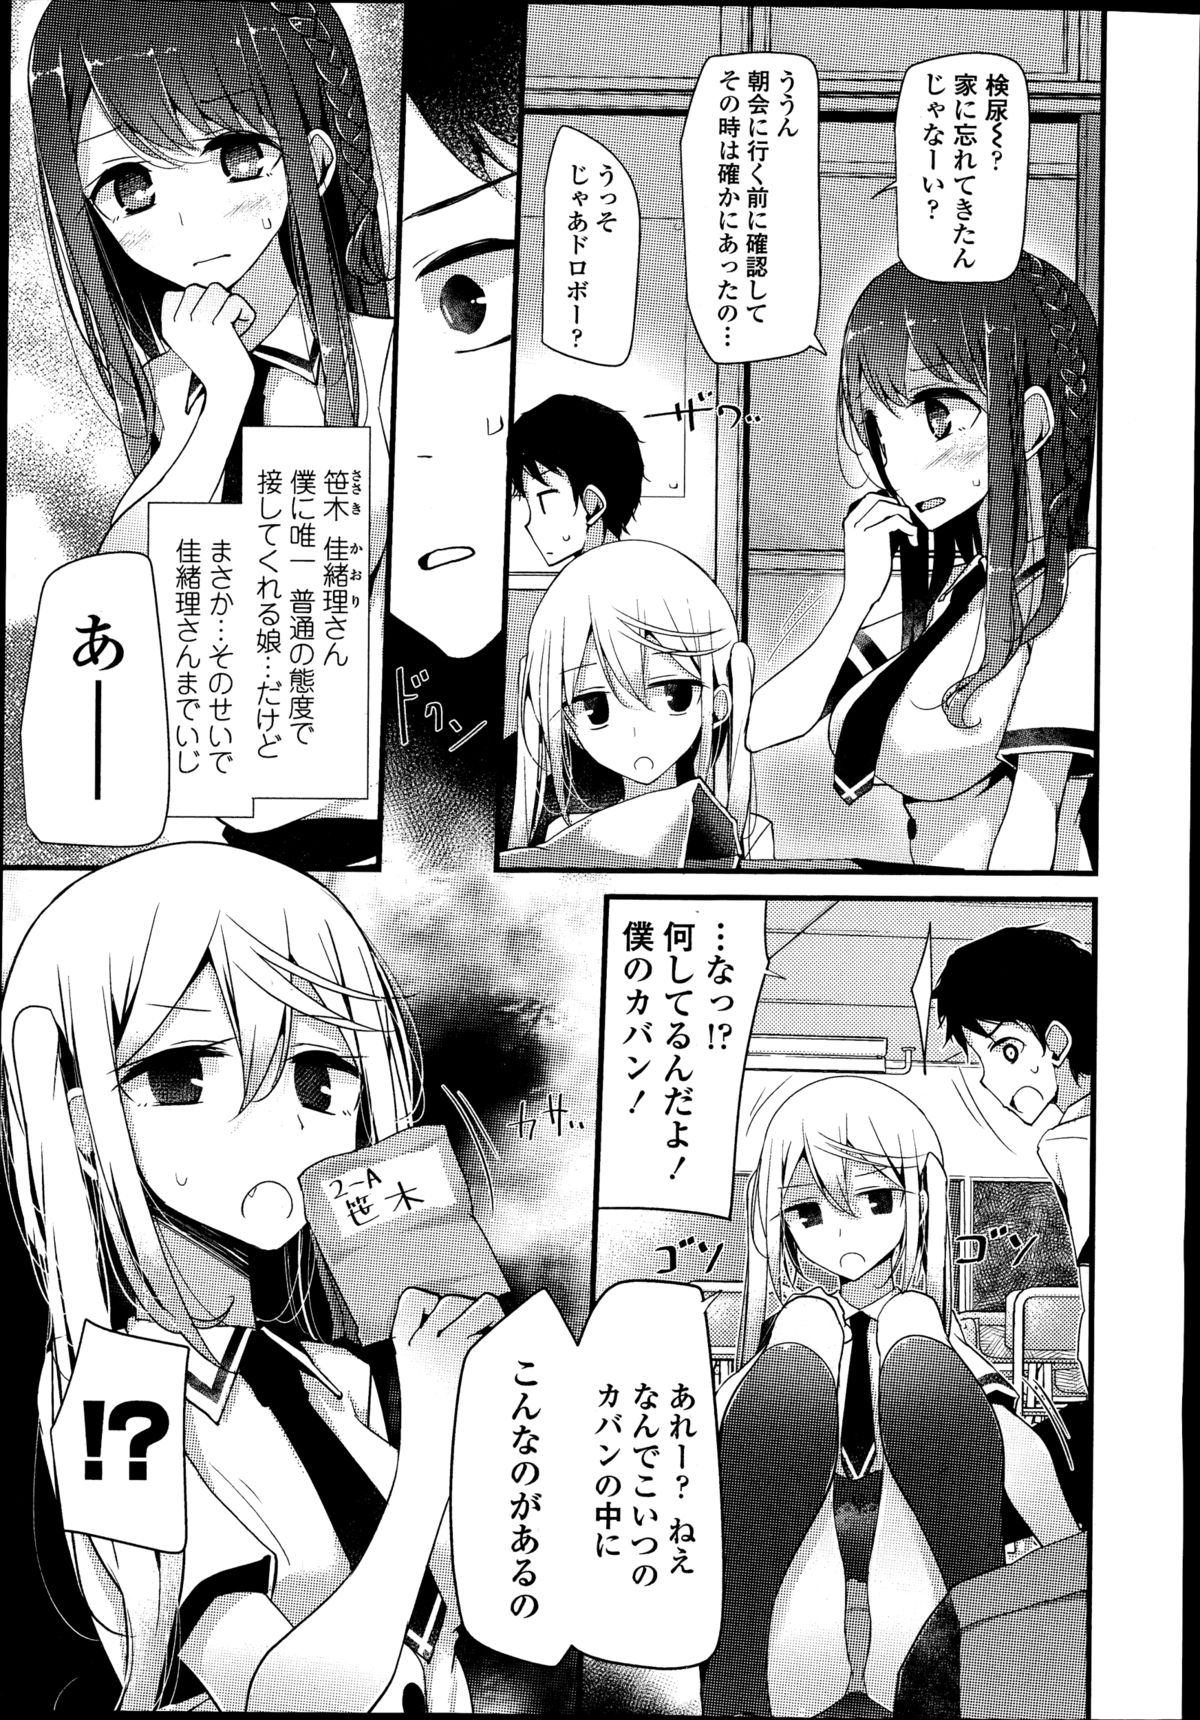 Girls forM Vol. 08 page 25 full